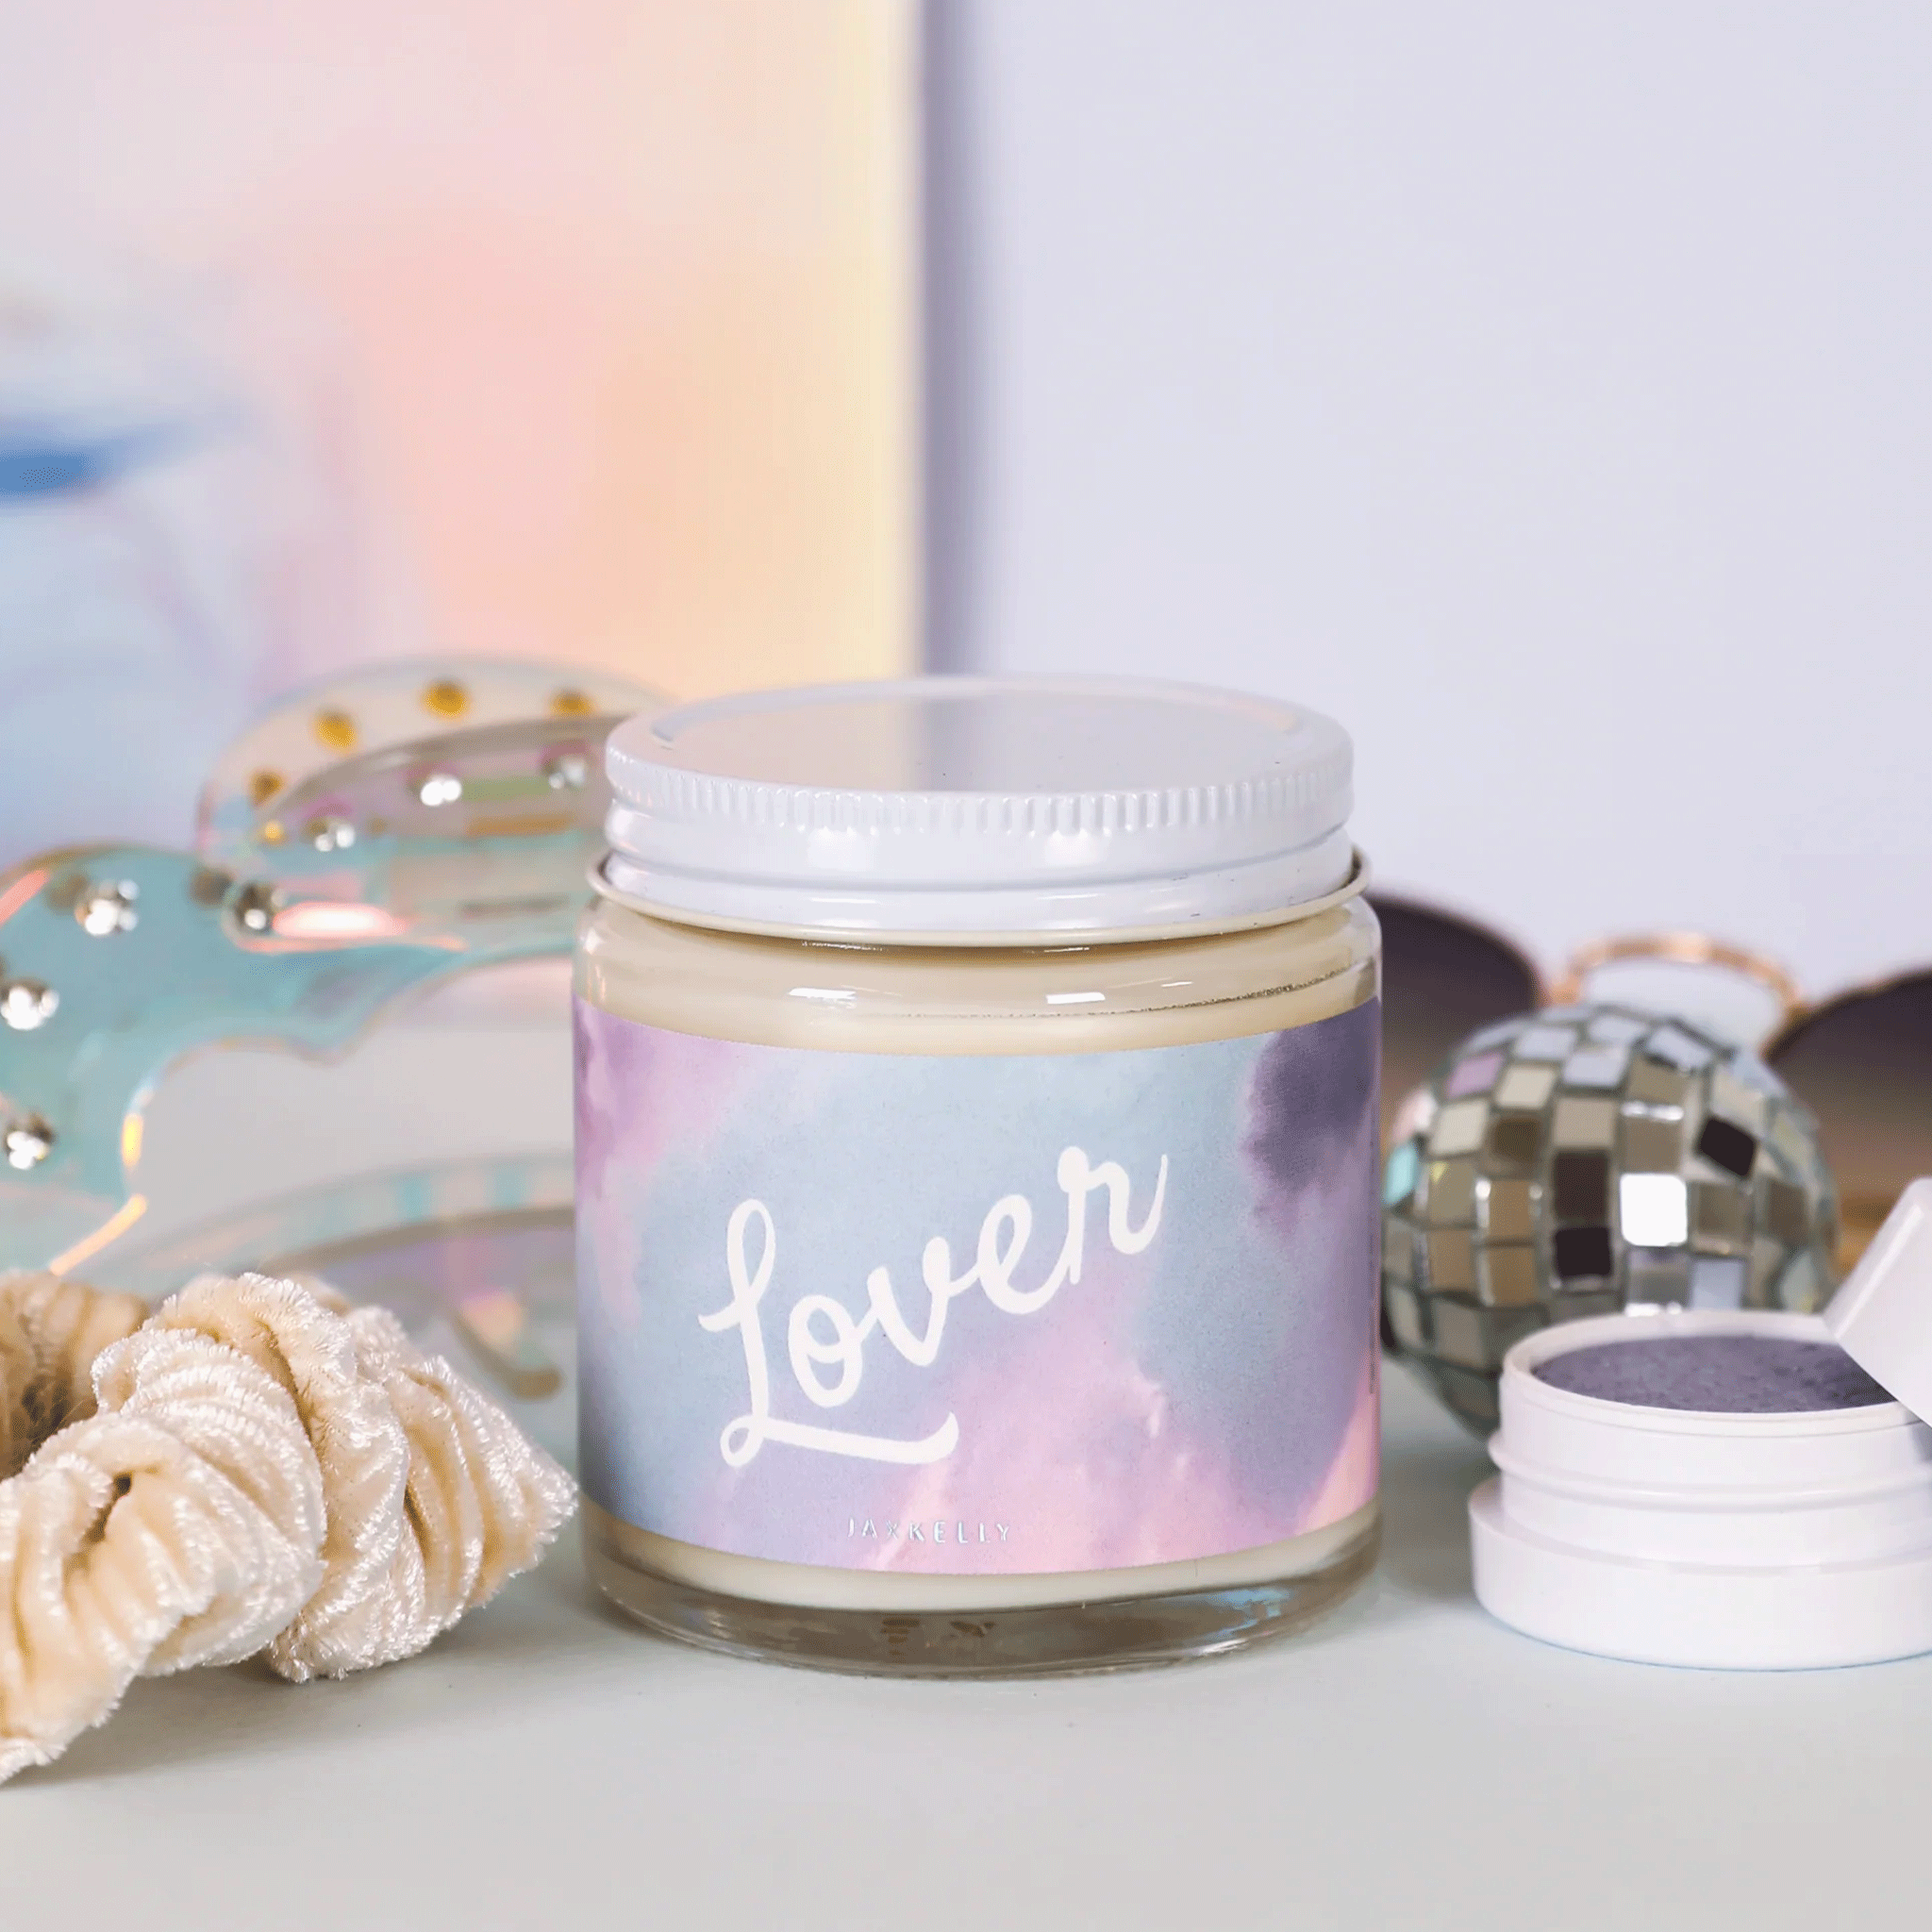 A pink and purple cloud label that reads, "Lover" on a glass jar candle with a white lid.